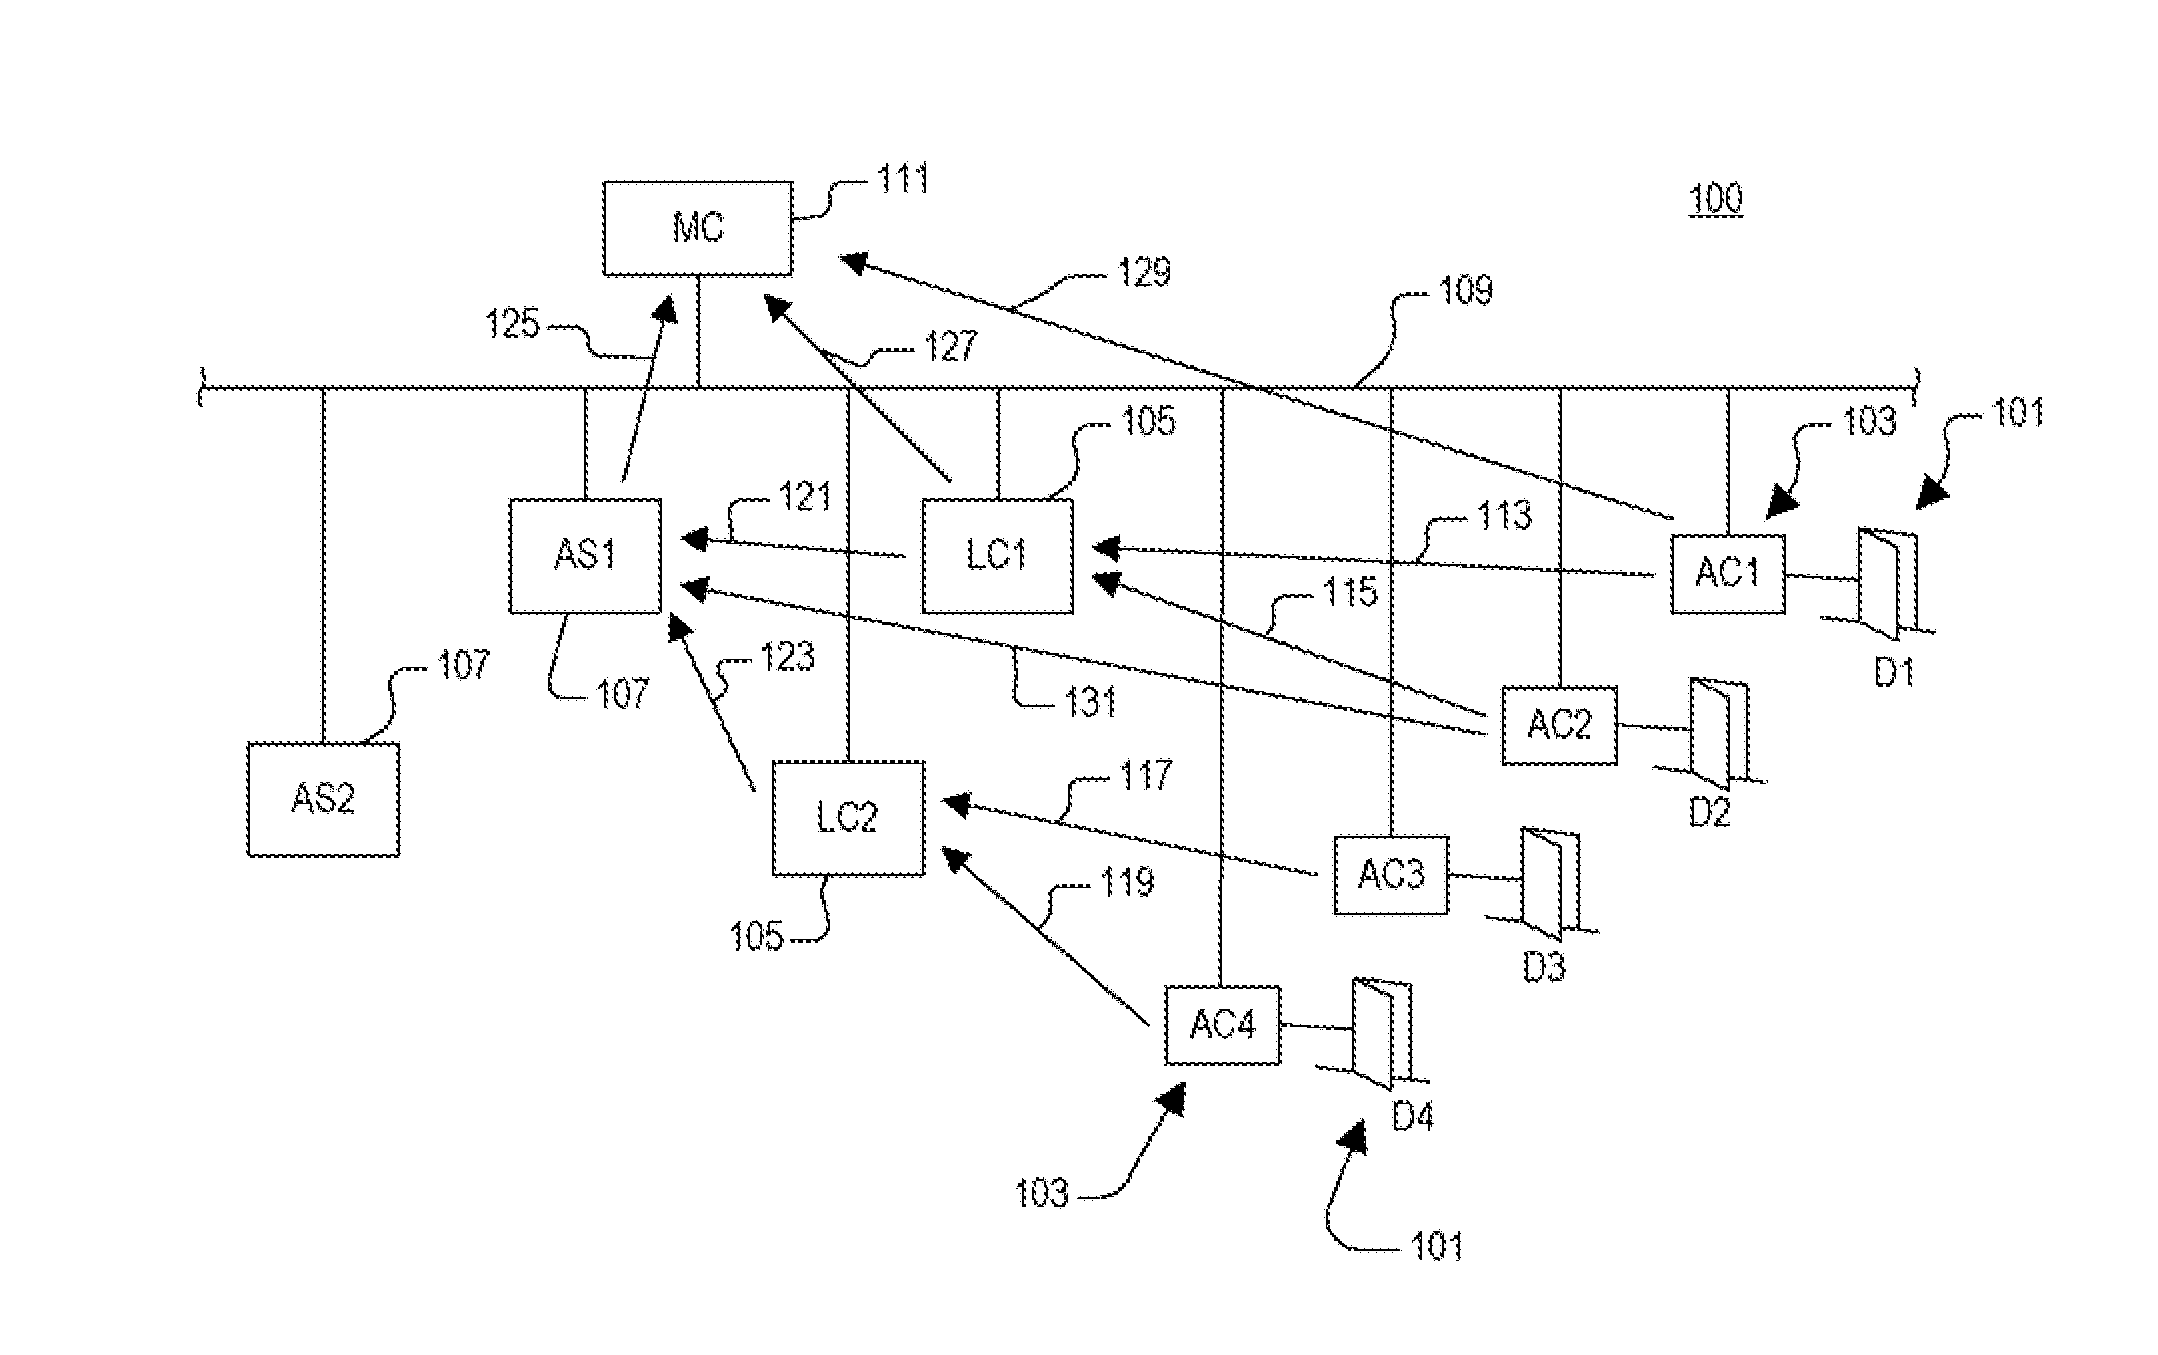 Feed protocol used to report status and event information in physical access control system